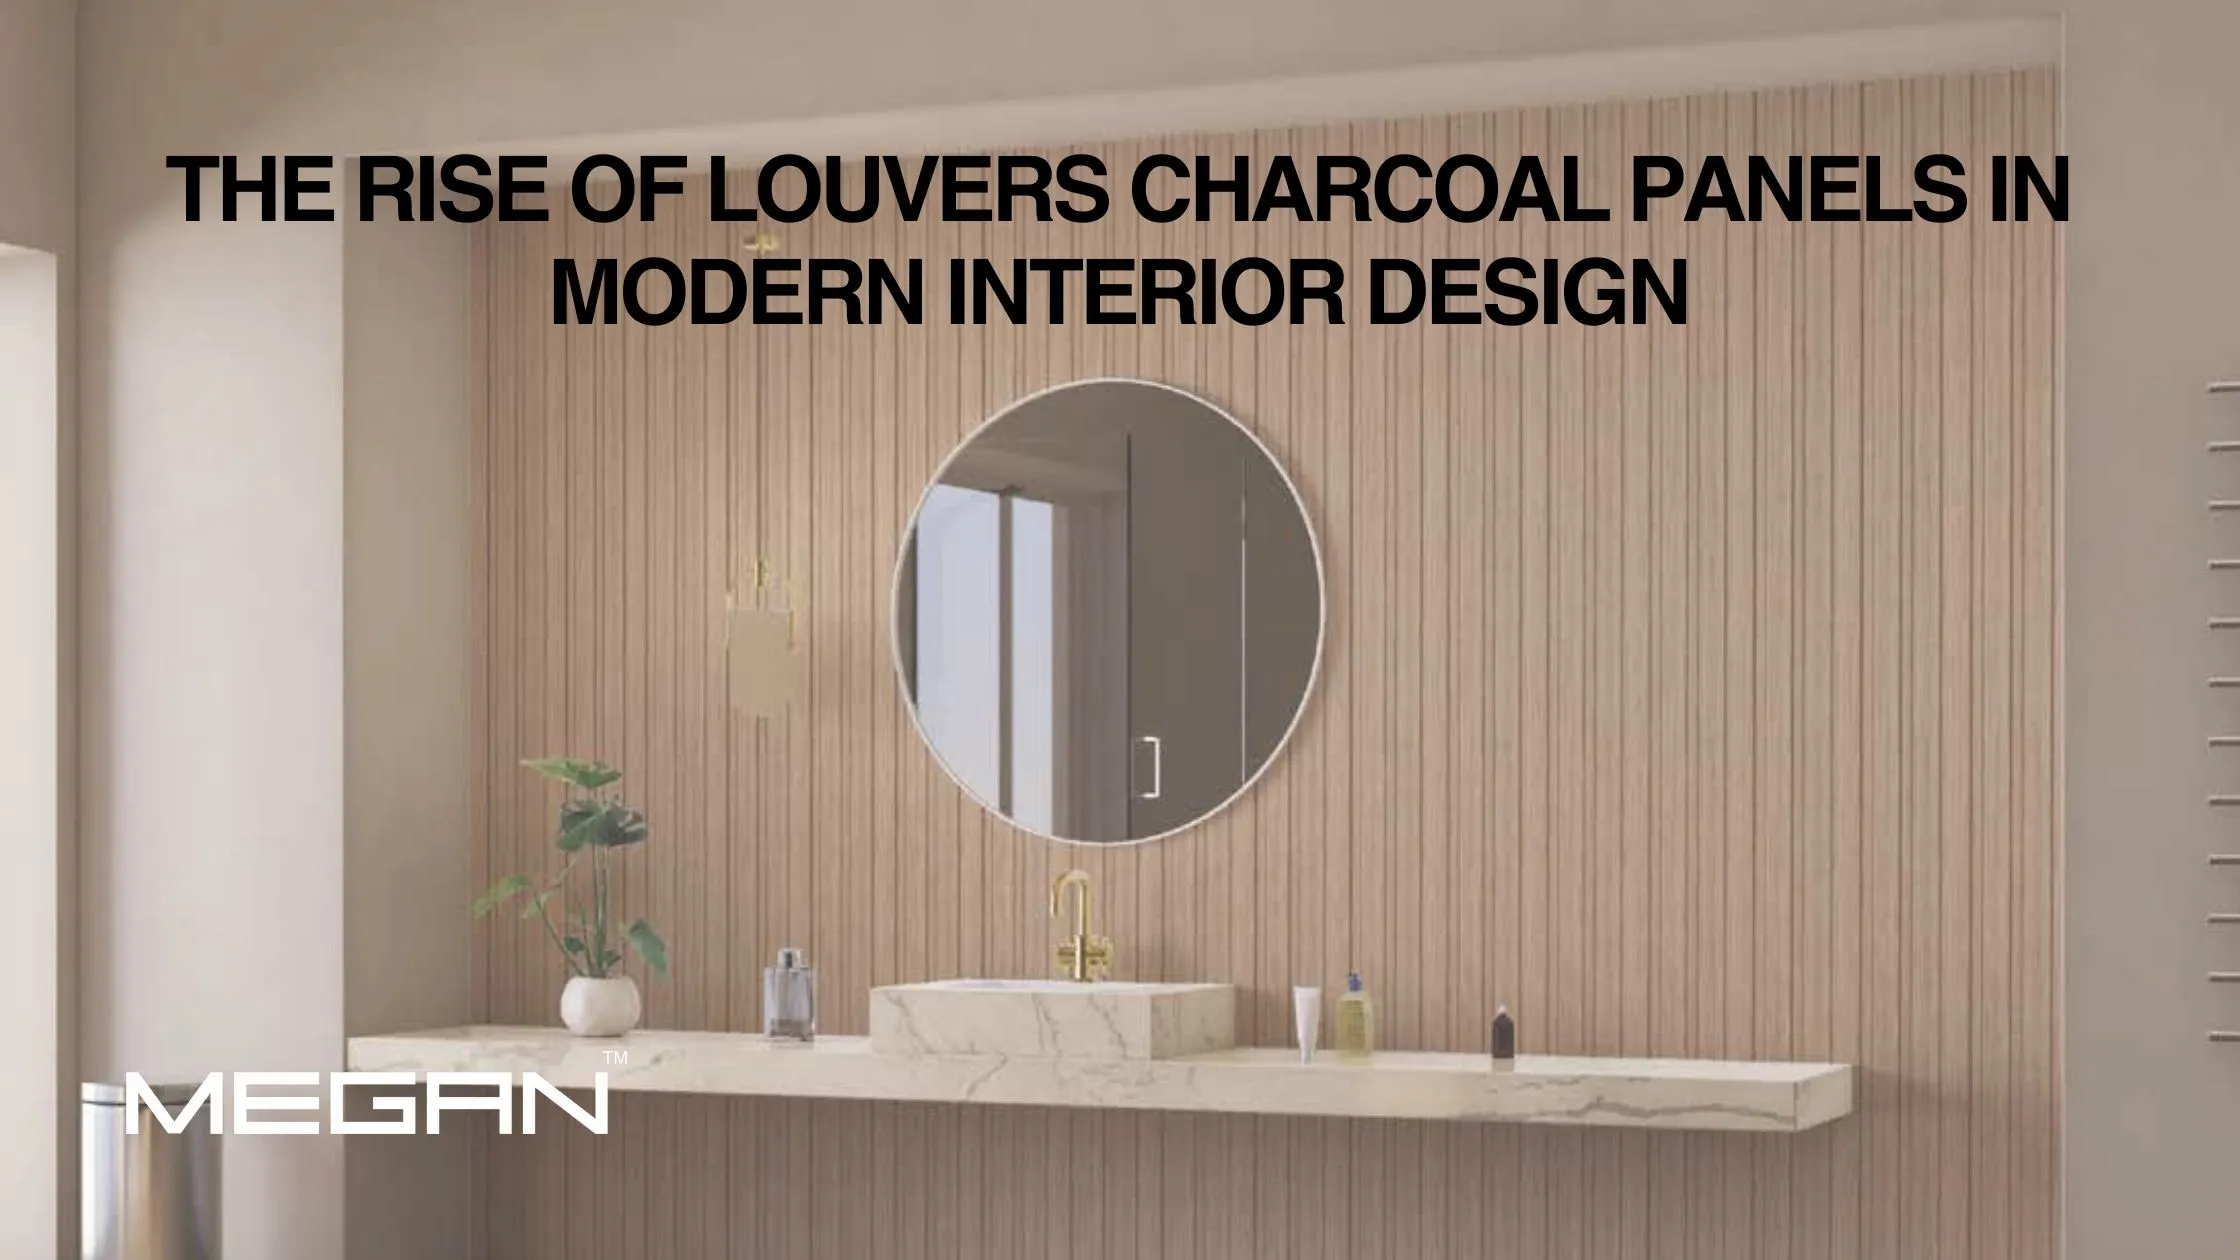 The Rise of Louvers Charcoal Panels in Modern Interior Design